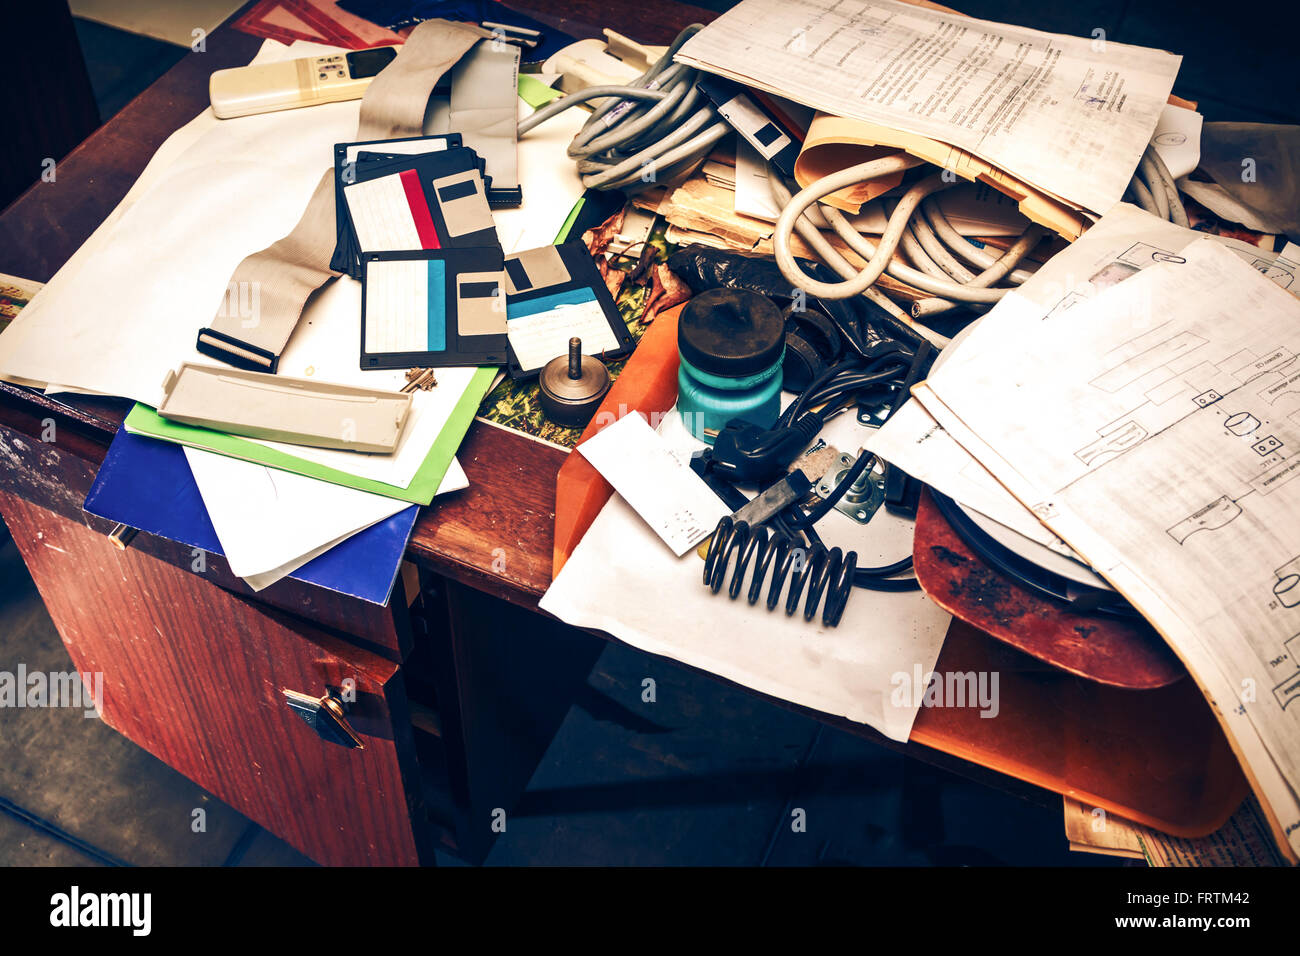 Messy workplace with stack of paper on table Stock Photo